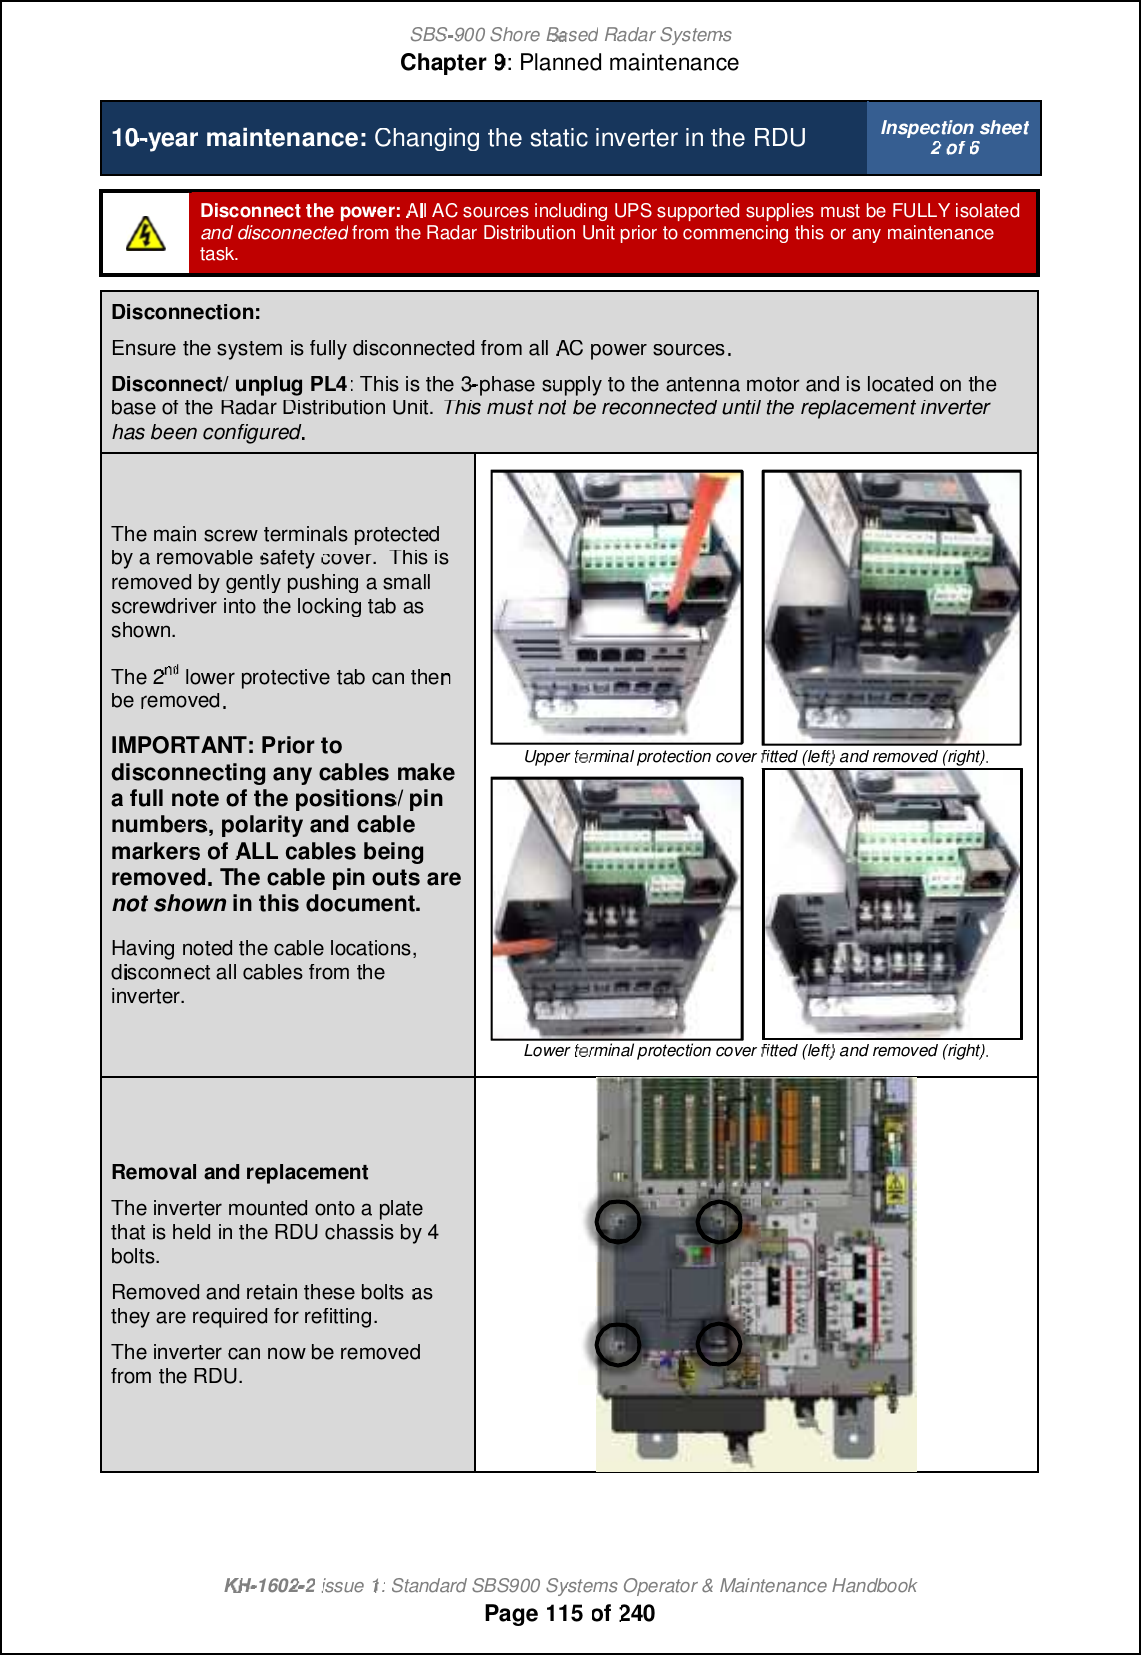 SBS-900 ShoreBaBasedRadar SystemsChapter9:Planned maintenanceKHKH-1602 2issue 1:Standard SBS900 Systems Operator &amp; Maintenance HandbookPage115of2401010-year maintenance:Changing the static inverter in the RDUInspection sheet2of6Disconnect the power:All AC sourcesincluding UPS supported suppliesmust be FULLY isolatedand disconnectedfromthe Radar Distribution Unit prior to commencing thisor any maintenancetask.Disconnection:Ensurethe system is fully disconnected from allACpower sourcesDisconnect/ unplug PL4: This is the 3-phase supply to the antenna motor and is located on thebase of the Radar Distribution Unit.This must notbe reconnected until the replacement inverterhas been configuredThe main screw terminals protectedby a removablesafetycover.This isremoved by gently pushing a smallscrewdriver into the locking tab asshown.The 2ndndndlower protective tab can thenberemovedIMPORTANT: Prior todisconnecting any cables makea full note of the positions/ pinnumbers, polarity and cablemarkersofALLcablesbeingremovedThe cable pin outs areThe cable pin outs arenot shownin this document.Having noted the cable locations,disconnect all cables from theinverter.Upper terminal protection coverfitted (left) and removed (right)Lower terminal protection coverfitted (left) and removed (right)Removaland replacementThe inverter mounted onto a platethat is held in the RDU chassis by 4bolts.Removed and retain these boltsasthey are required for refitting.The inverter can now be removedfrom the RDU.